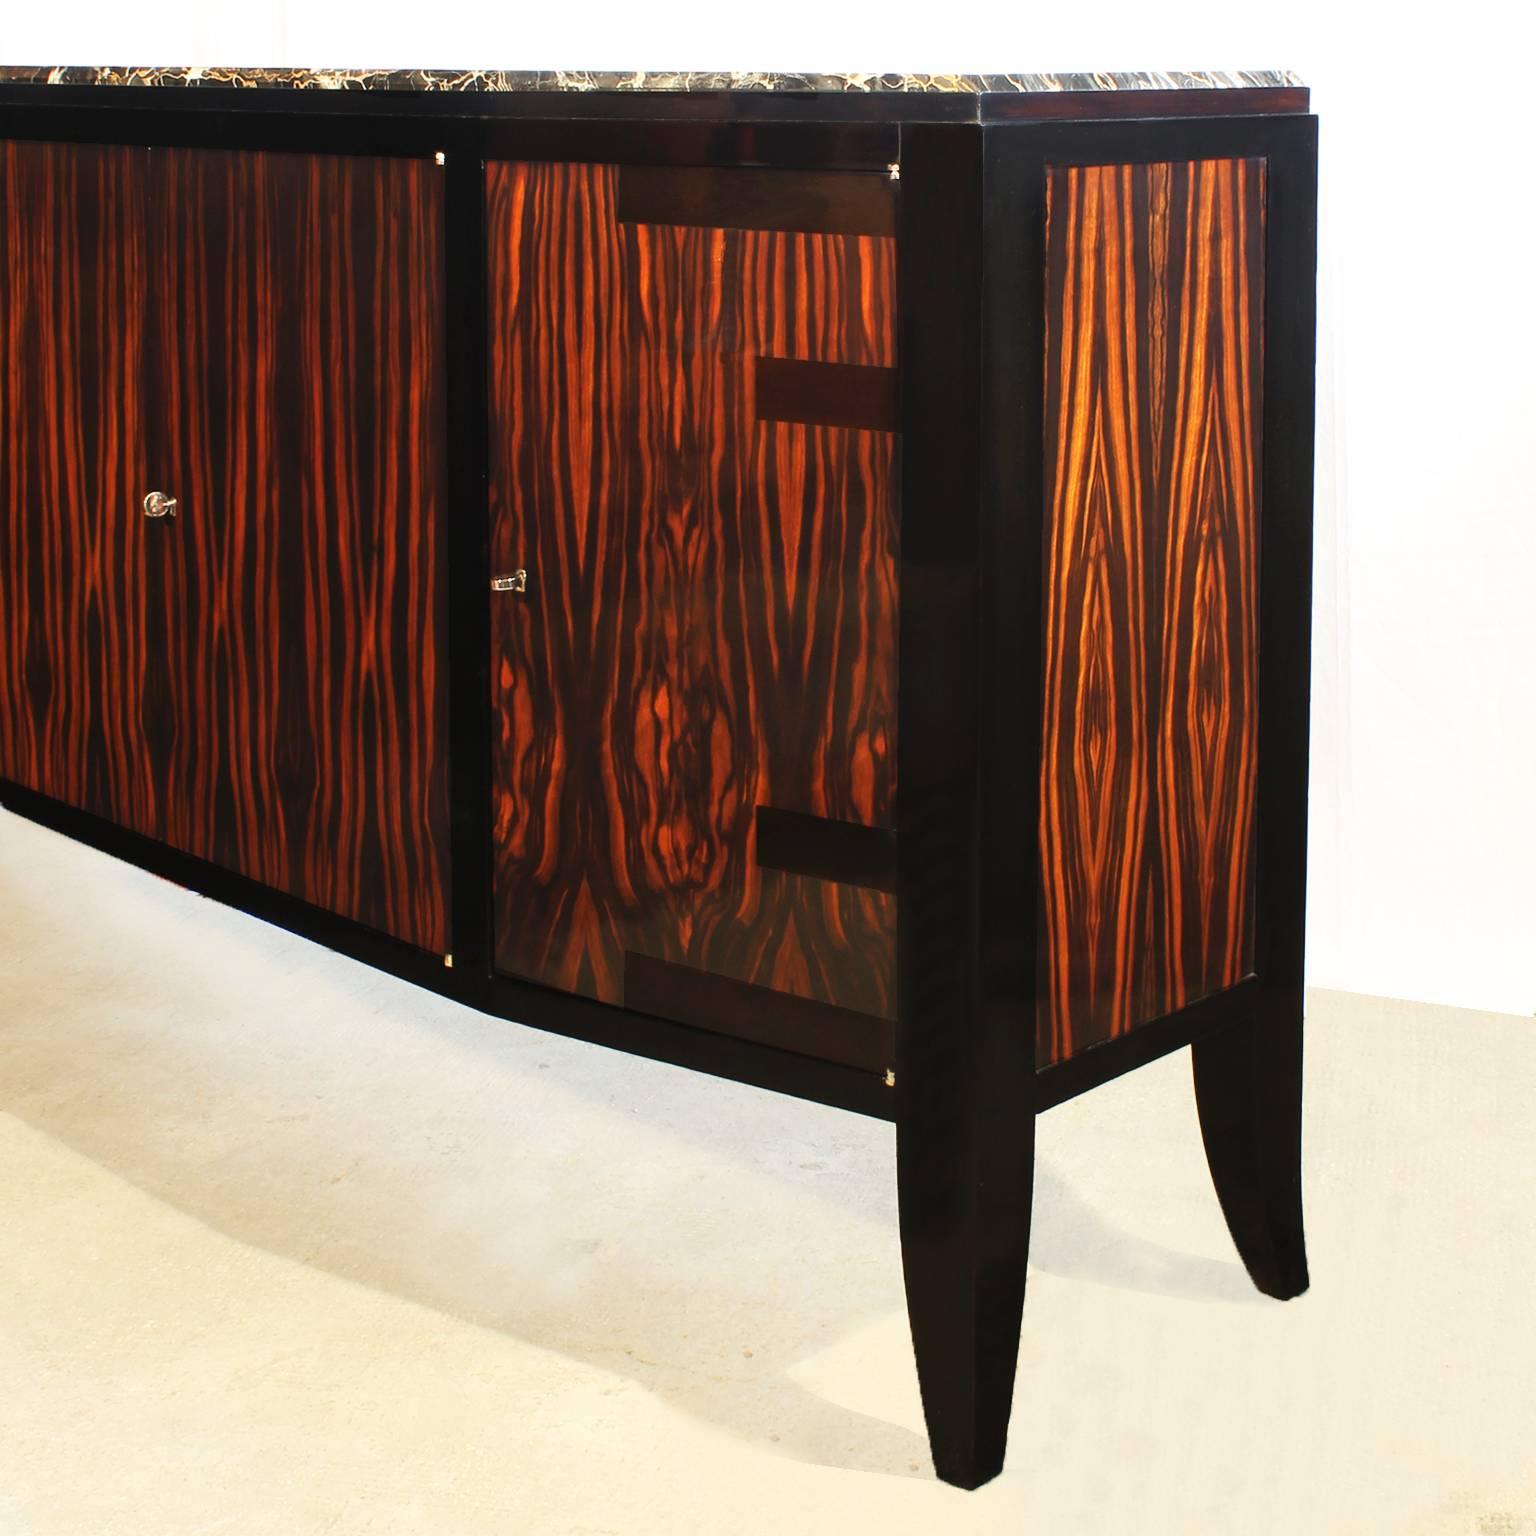 Spectacular Art Deco sideboard with four doors, solid oak structure with Macassar ebony veneer, solid stained mahogany feet and frame, French polish, Portor marble on top,
France, circa 1925.

Available the matching dining table.